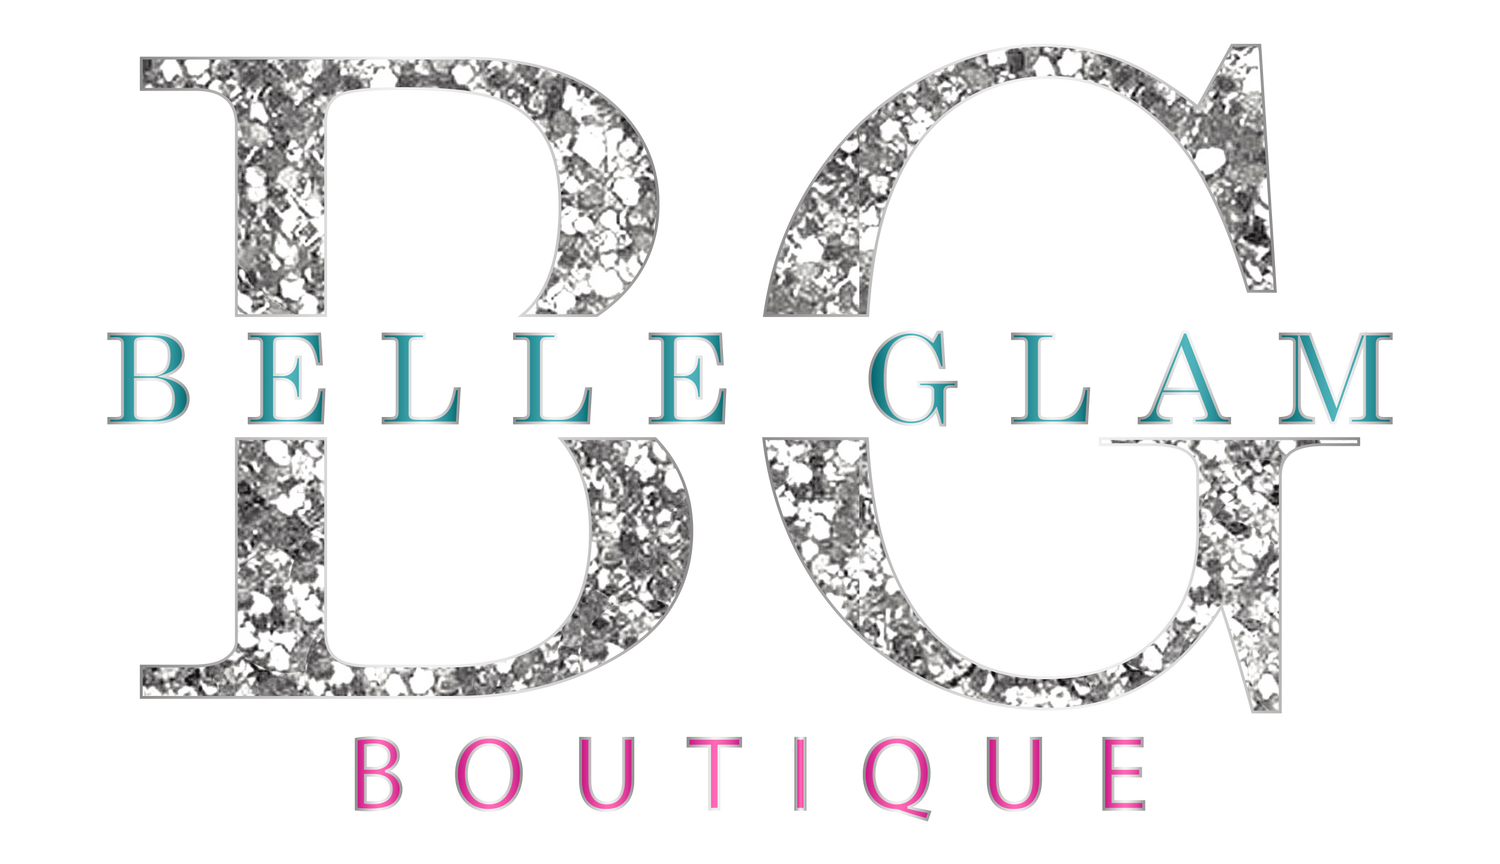 About Us – HelloGlam Boutique